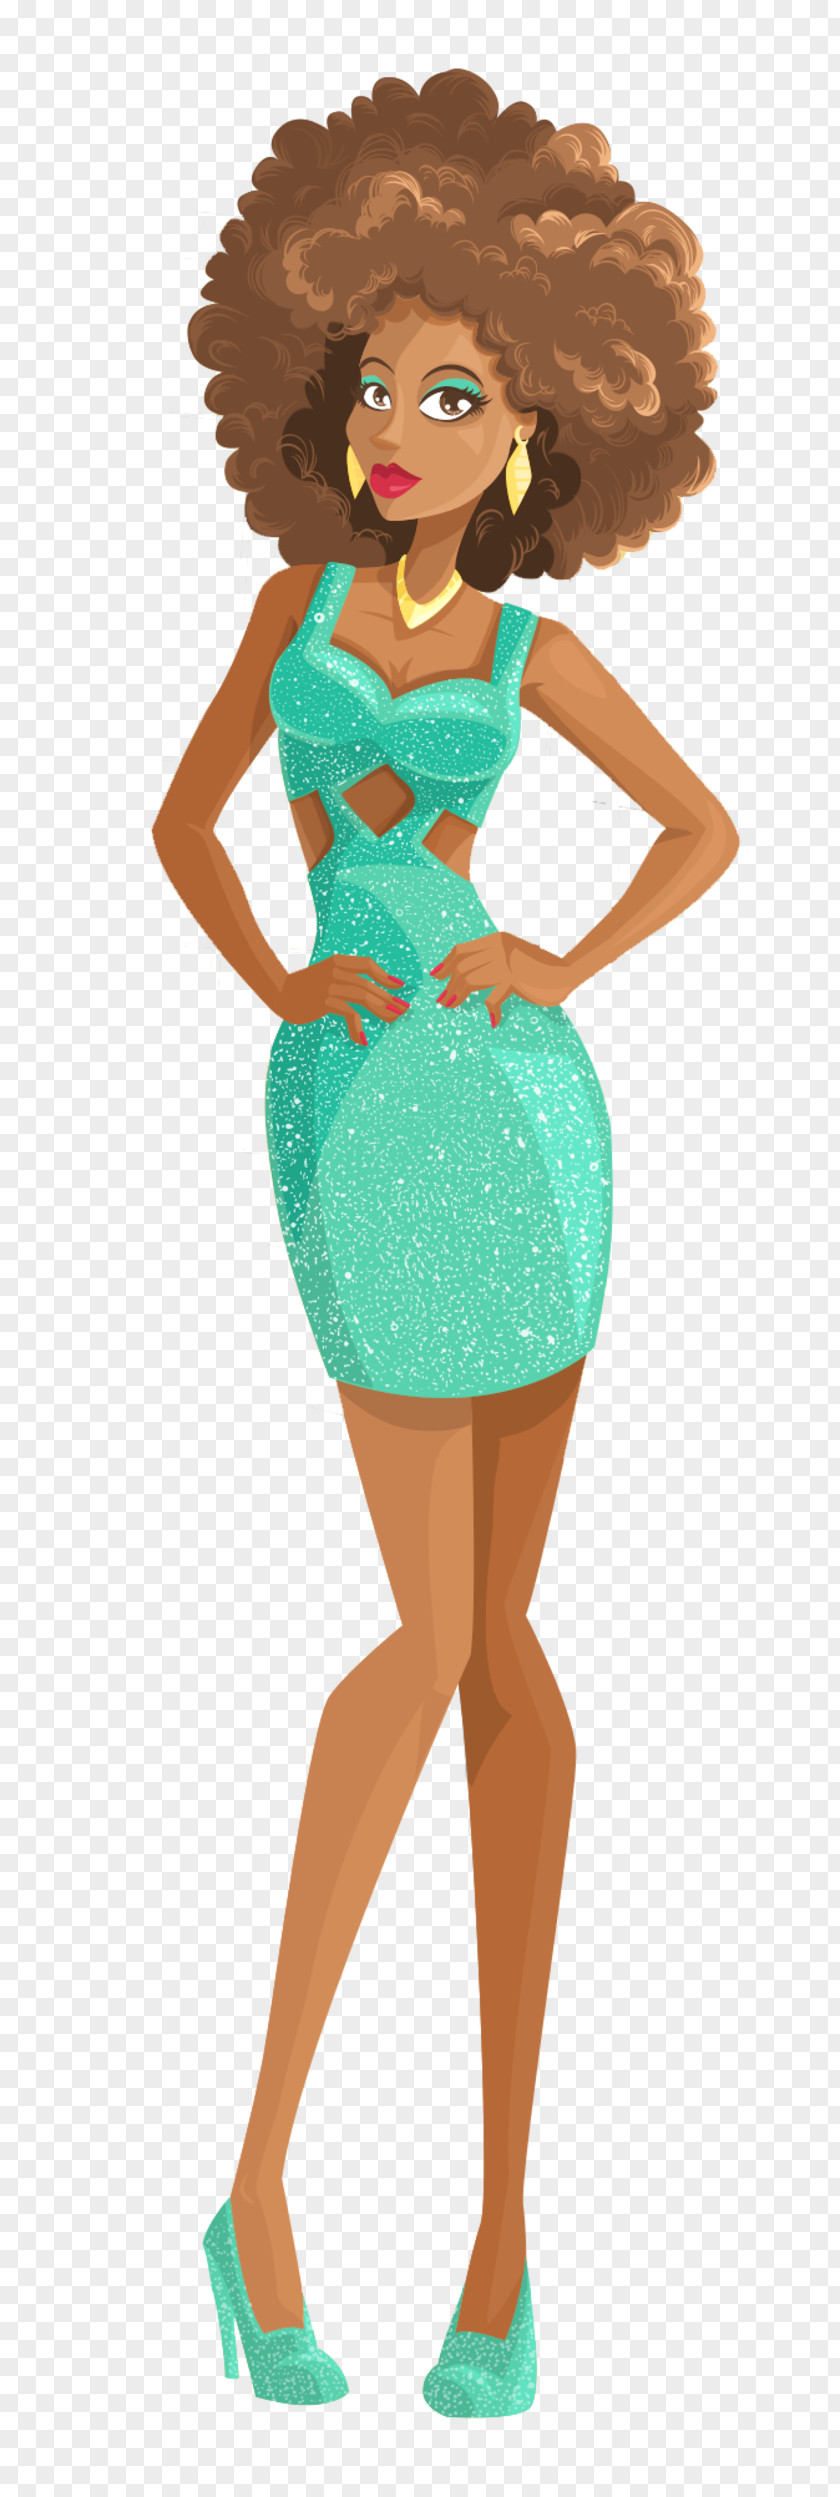 Mulher Fashion Vector Graphics Image Clip Art PNG